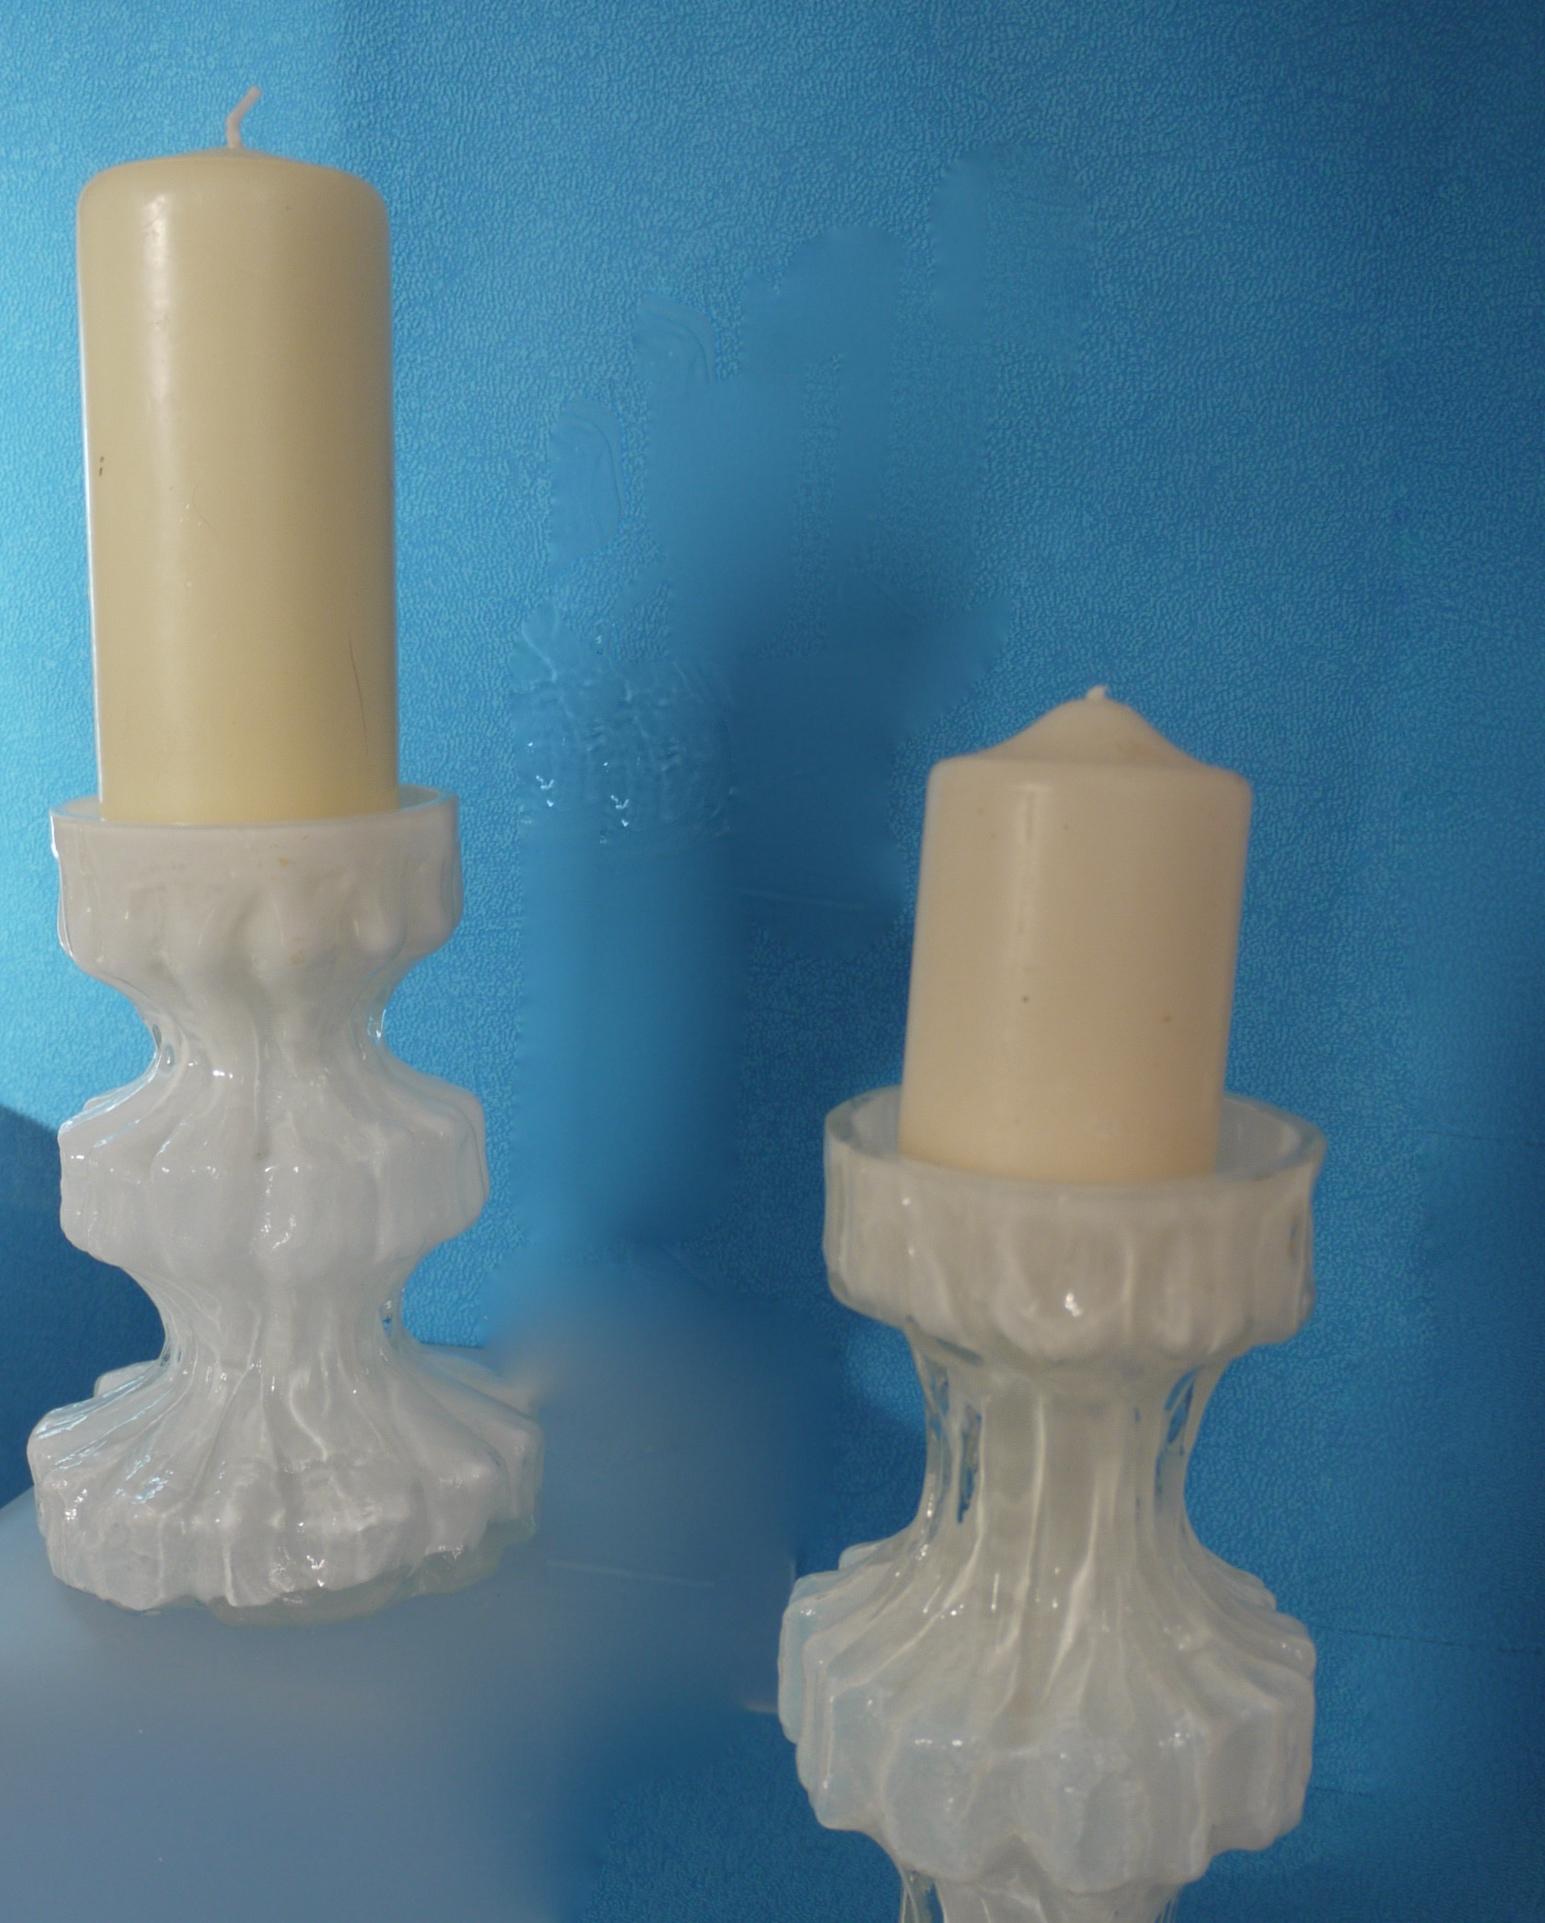 Pair of Scandinavian Glass Candlesticks Ingrid Glasshutte Mid-1960s Space Age In Good Condition For Sale In Halstead, GB